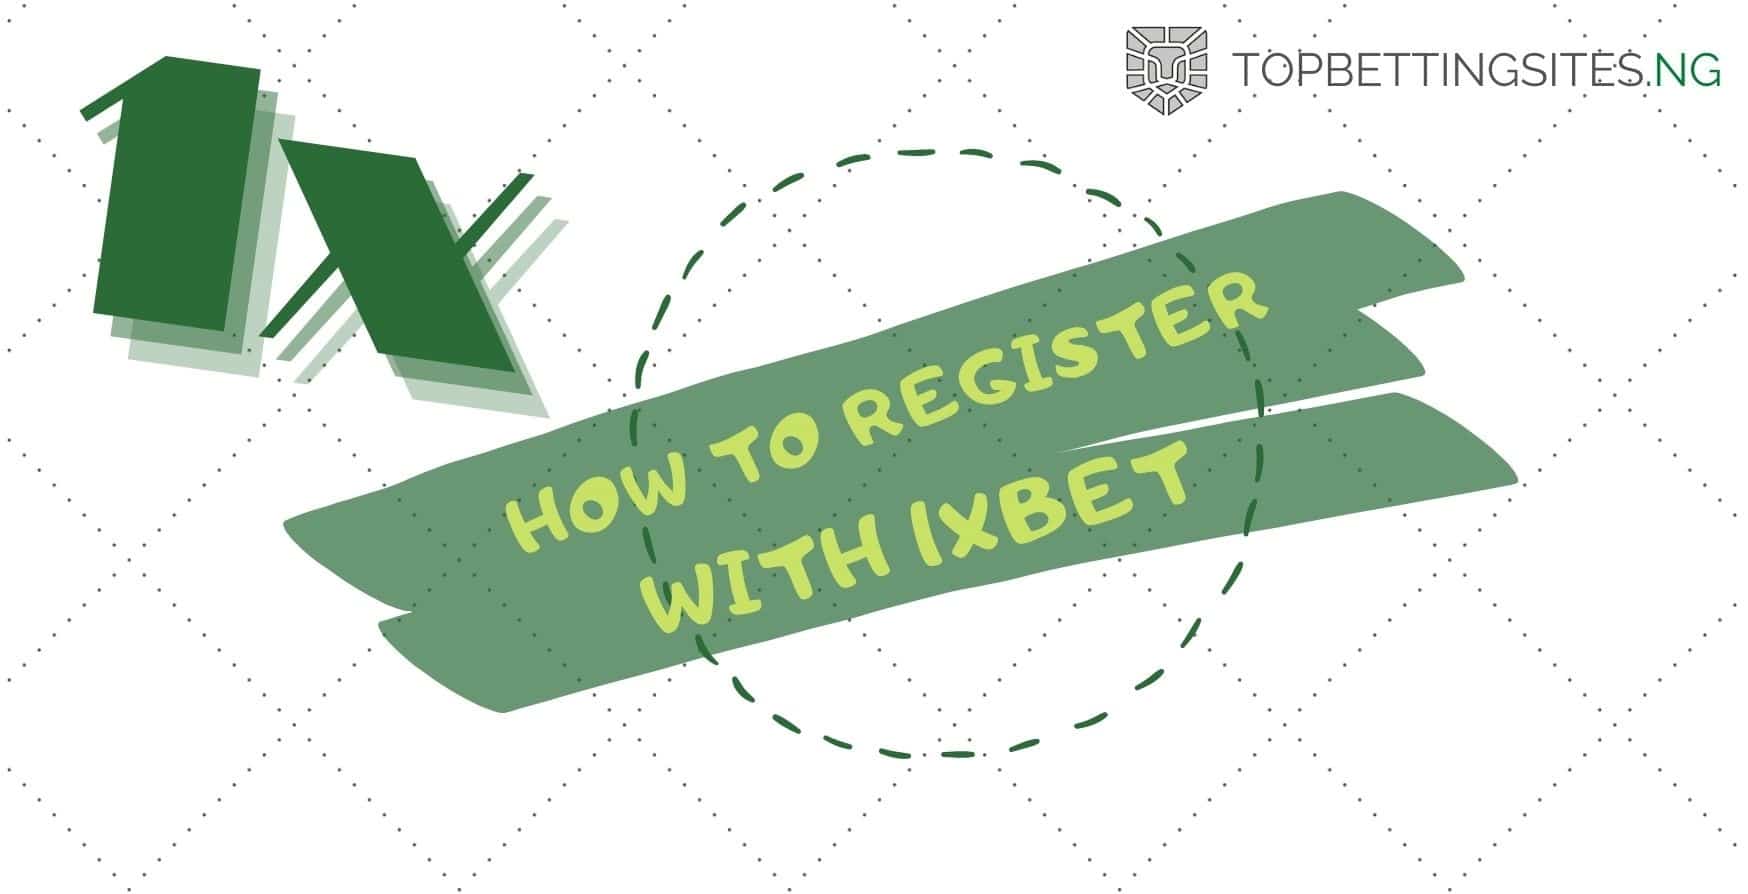 How to Register with 1xBet?